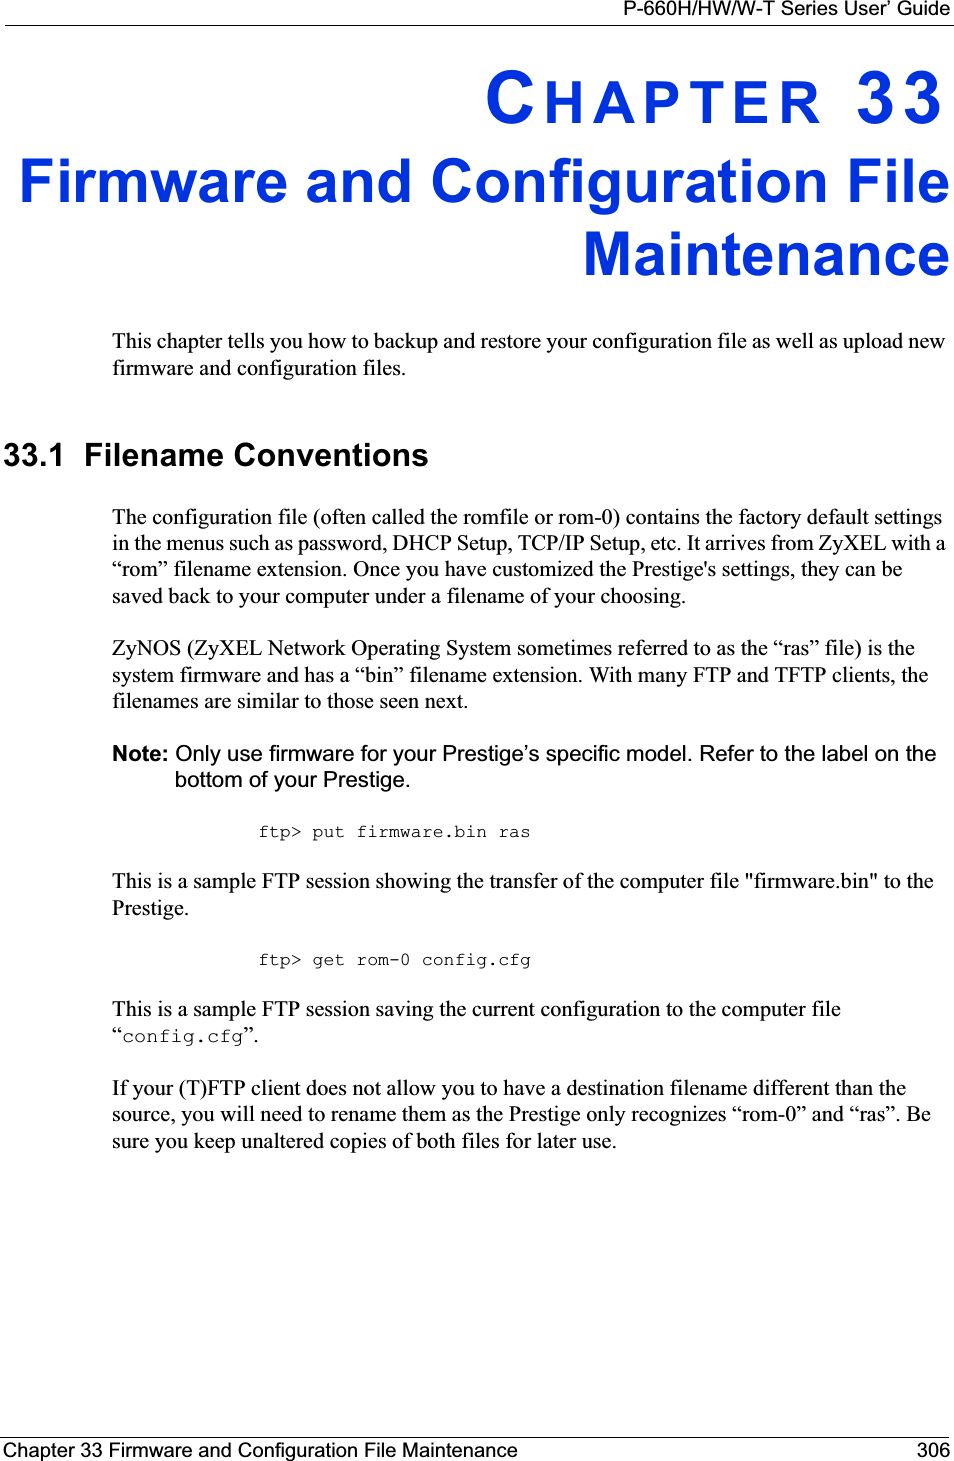 P-660H/HW/W-T Series User’ GuideChapter 33 Firmware and Configuration File Maintenance 306CHAPTER 33Firmware and Configuration FileMaintenanceThis chapter tells you how to backup and restore your configuration file as well as upload new firmware and configuration files.33.1  Filename ConventionsThe configuration file (often called the romfile or rom-0) contains the factory default settings in the menus such as password, DHCP Setup, TCP/IP Setup, etc. It arrives from ZyXEL with a “rom” filename extension. Once you have customized the Prestige&apos;s settings, they can be saved back to your computer under a filename of your choosing.ZyNOS (ZyXEL Network Operating System sometimes referred to as the “ras” file) is the system firmware and has a “bin” filename extension. With many FTP and TFTP clients, the filenames are similar to those seen next. Note: Only use firmware for your Prestige’s specific model. Refer to the label on the bottom of your Prestige.ftp&gt; put firmware.bin rasThis is a sample FTP session showing the transfer of the computer file &quot;firmware.bin&quot; to the Prestige.ftp&gt; get rom-0 config.cfgThis is a sample FTP session saving the current configuration to the computer file “config.cfg”.If your (T)FTP client does not allow you to have a destination filename different than the source, you will need to rename them as the Prestige only recognizes “rom-0” and “ras”. Be sure you keep unaltered copies of both files for later use.